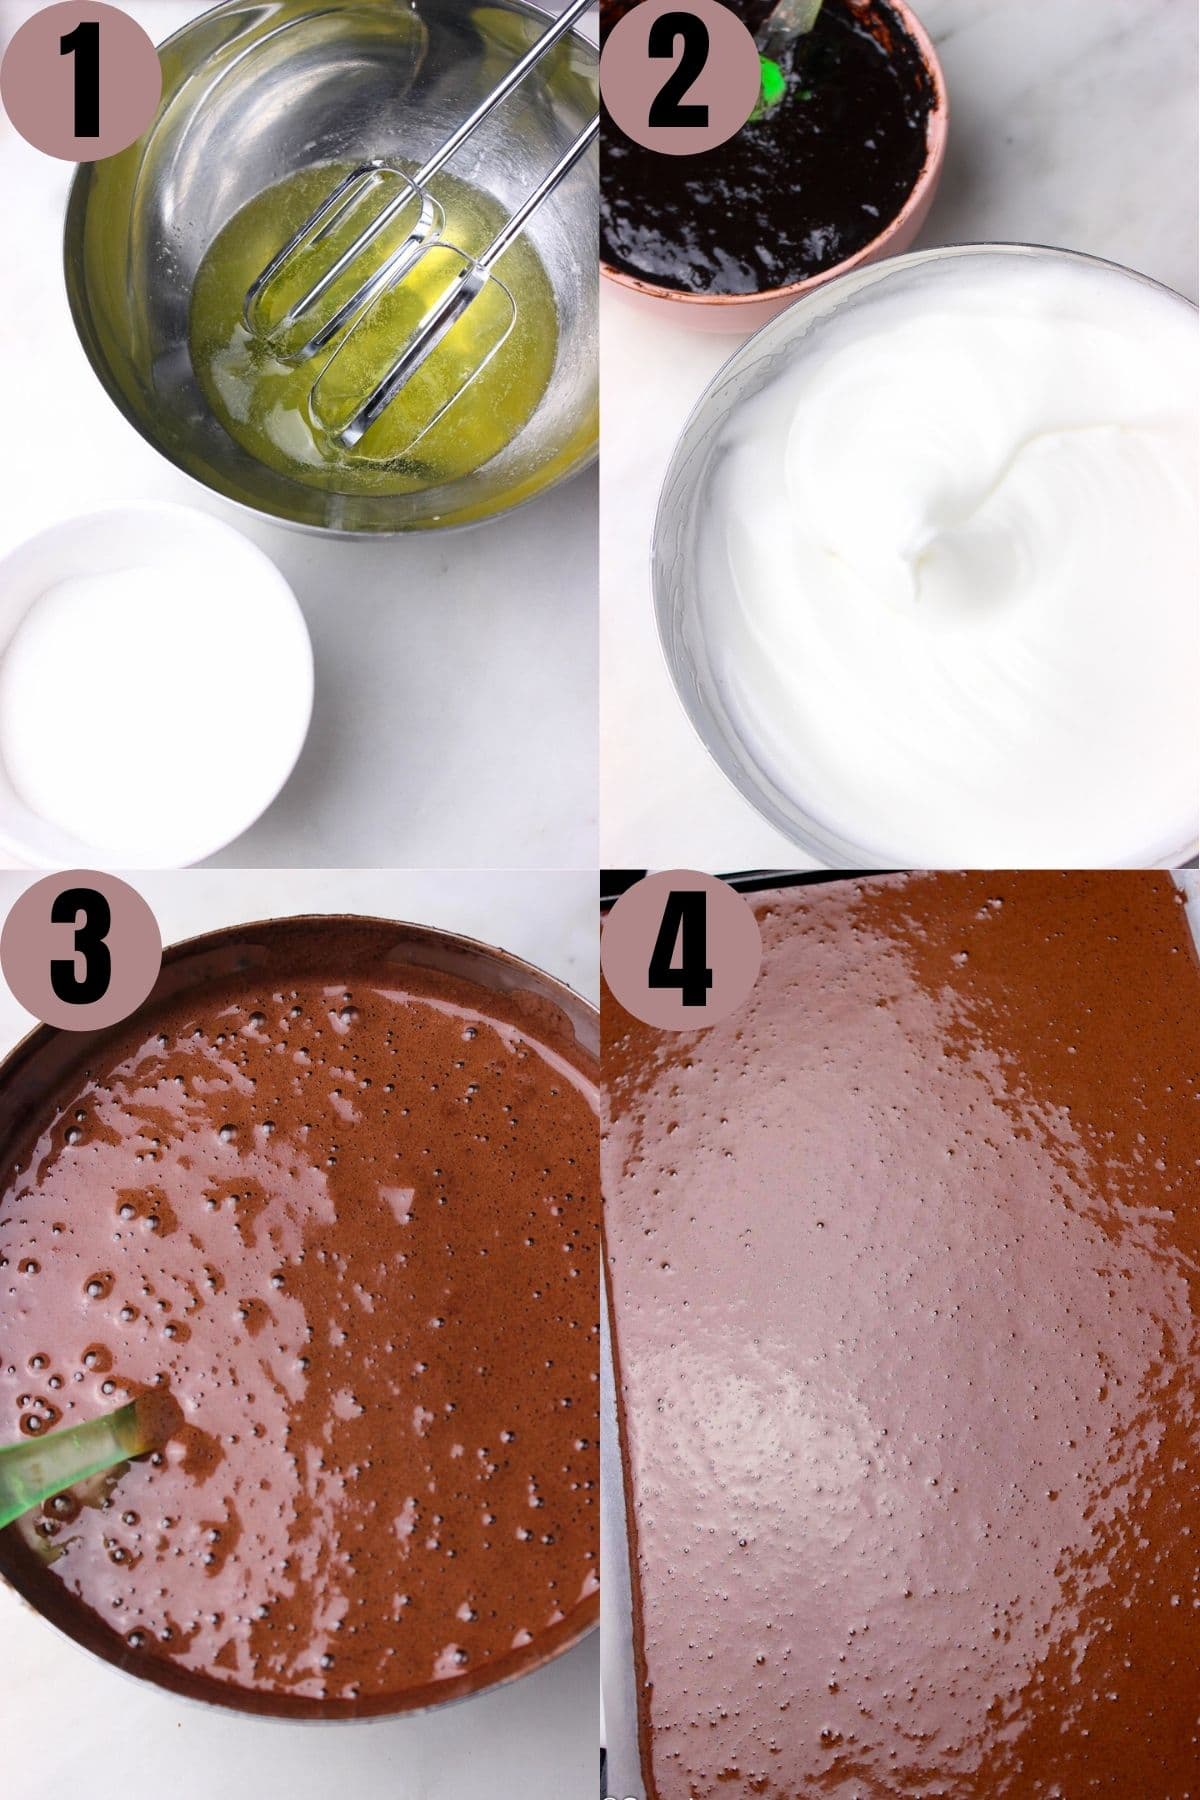 Step by step process of how to make swiss roll, by whipping egg whites and batter separately.